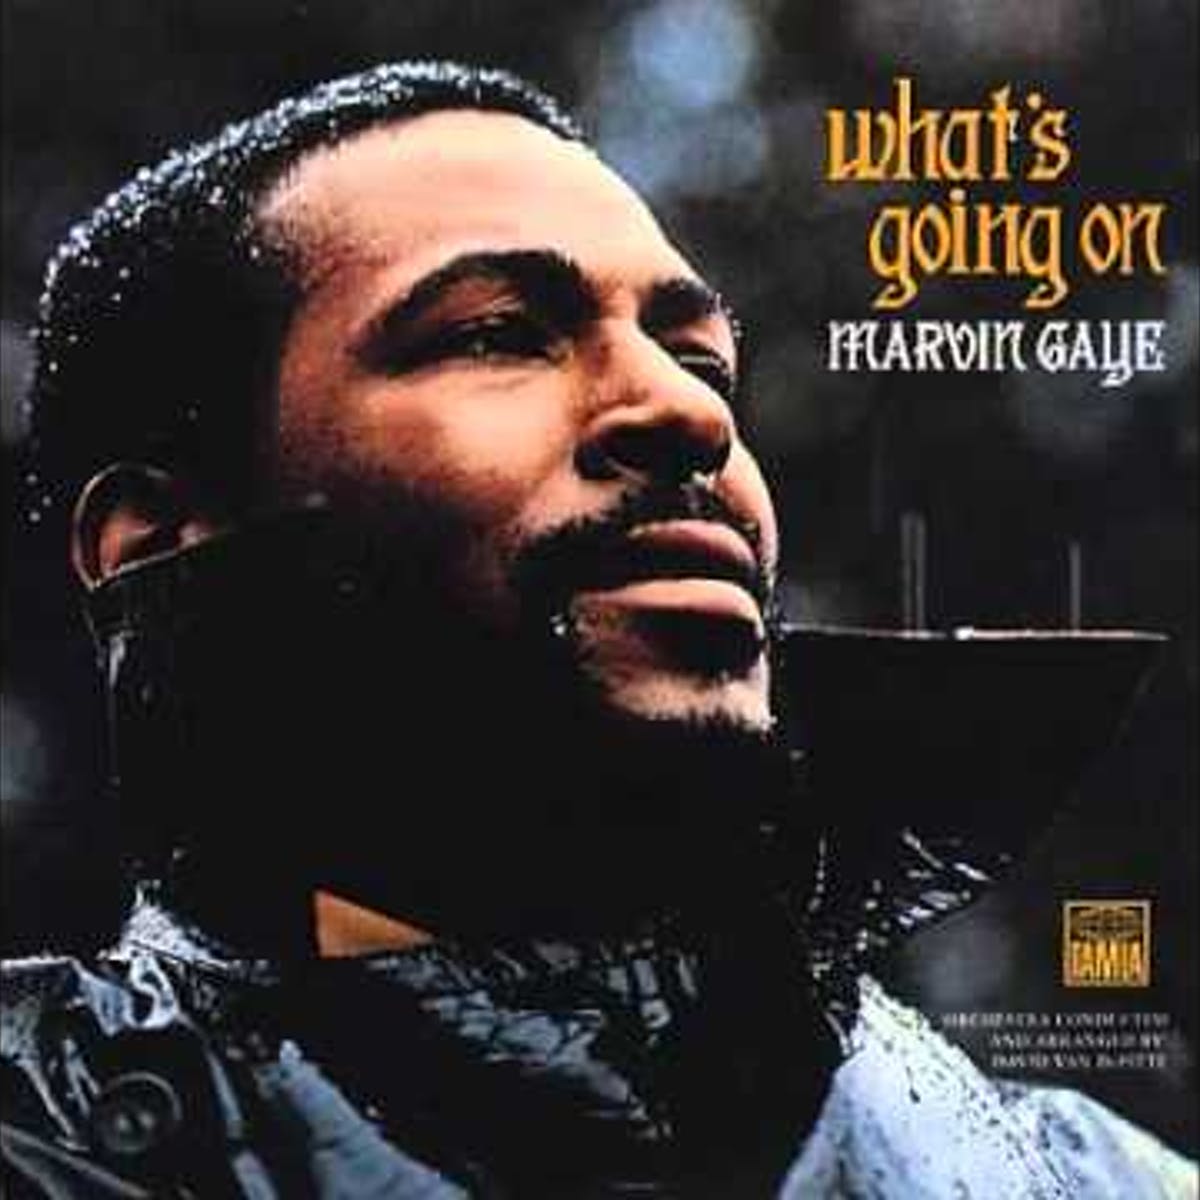 MP3: Marvin Gaye - What's Going On